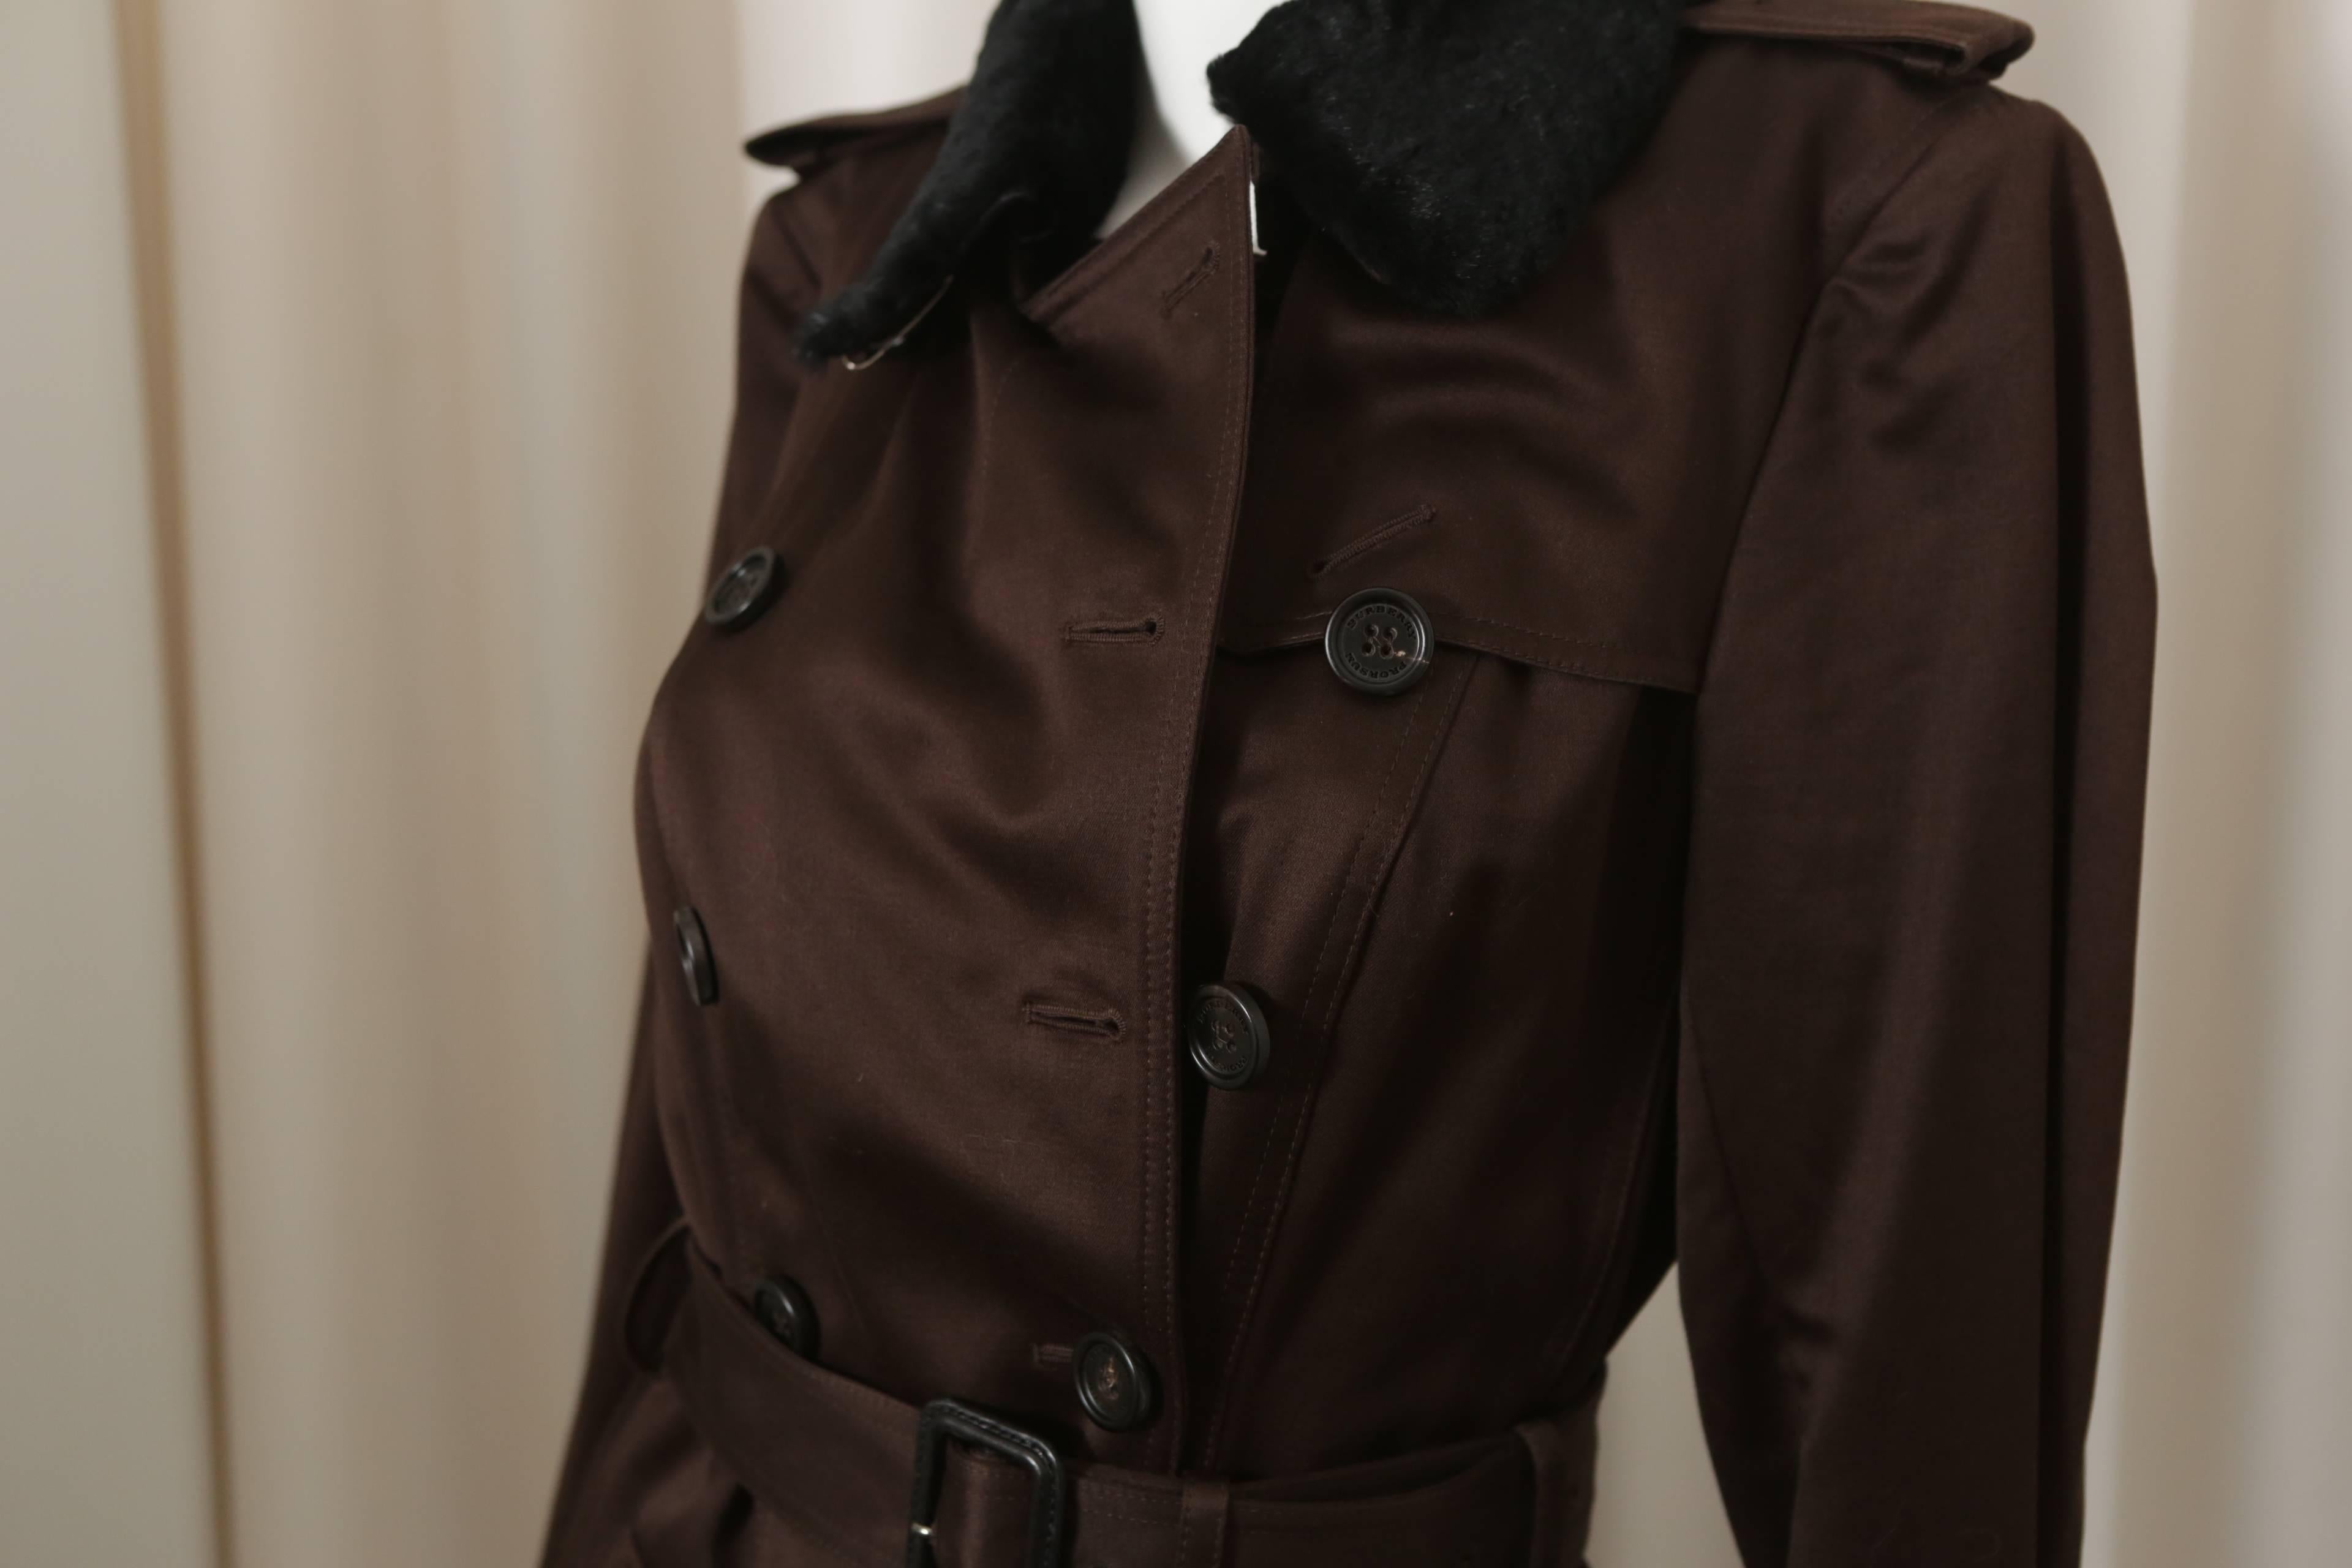 Burberry Prorsum classic trench w/ matching belt, double-breasted buttons, buttoned pockets & dyed rabbit removable rabbit collar. 